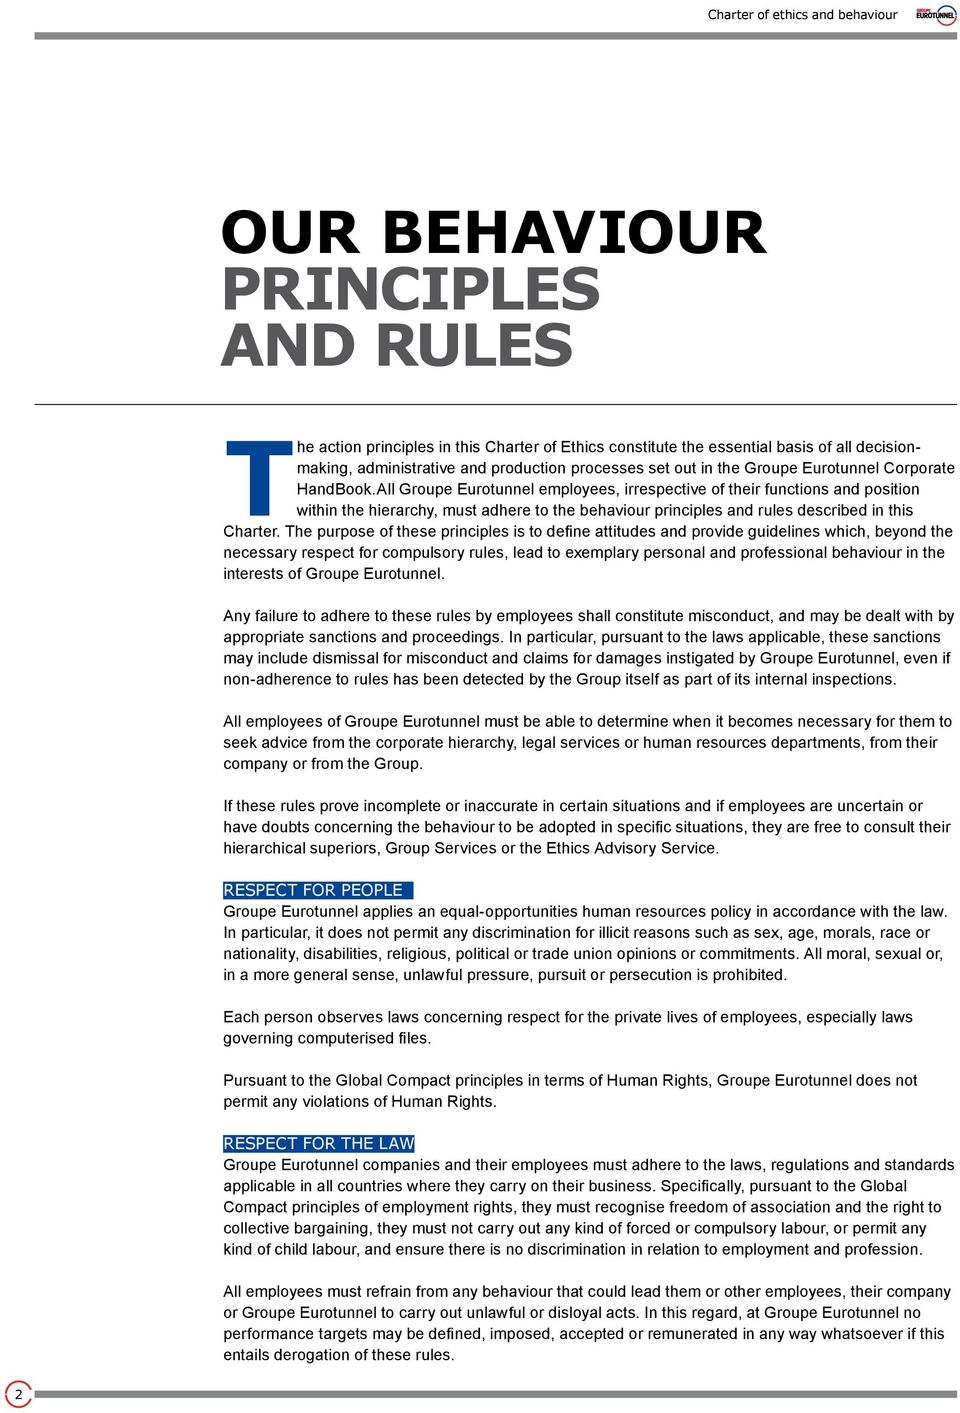 All Groupe Eurotunnel employees, irrespective of their functions and position within the hierarchy, must adhere to the behaviour principles and rules described in this Charter.